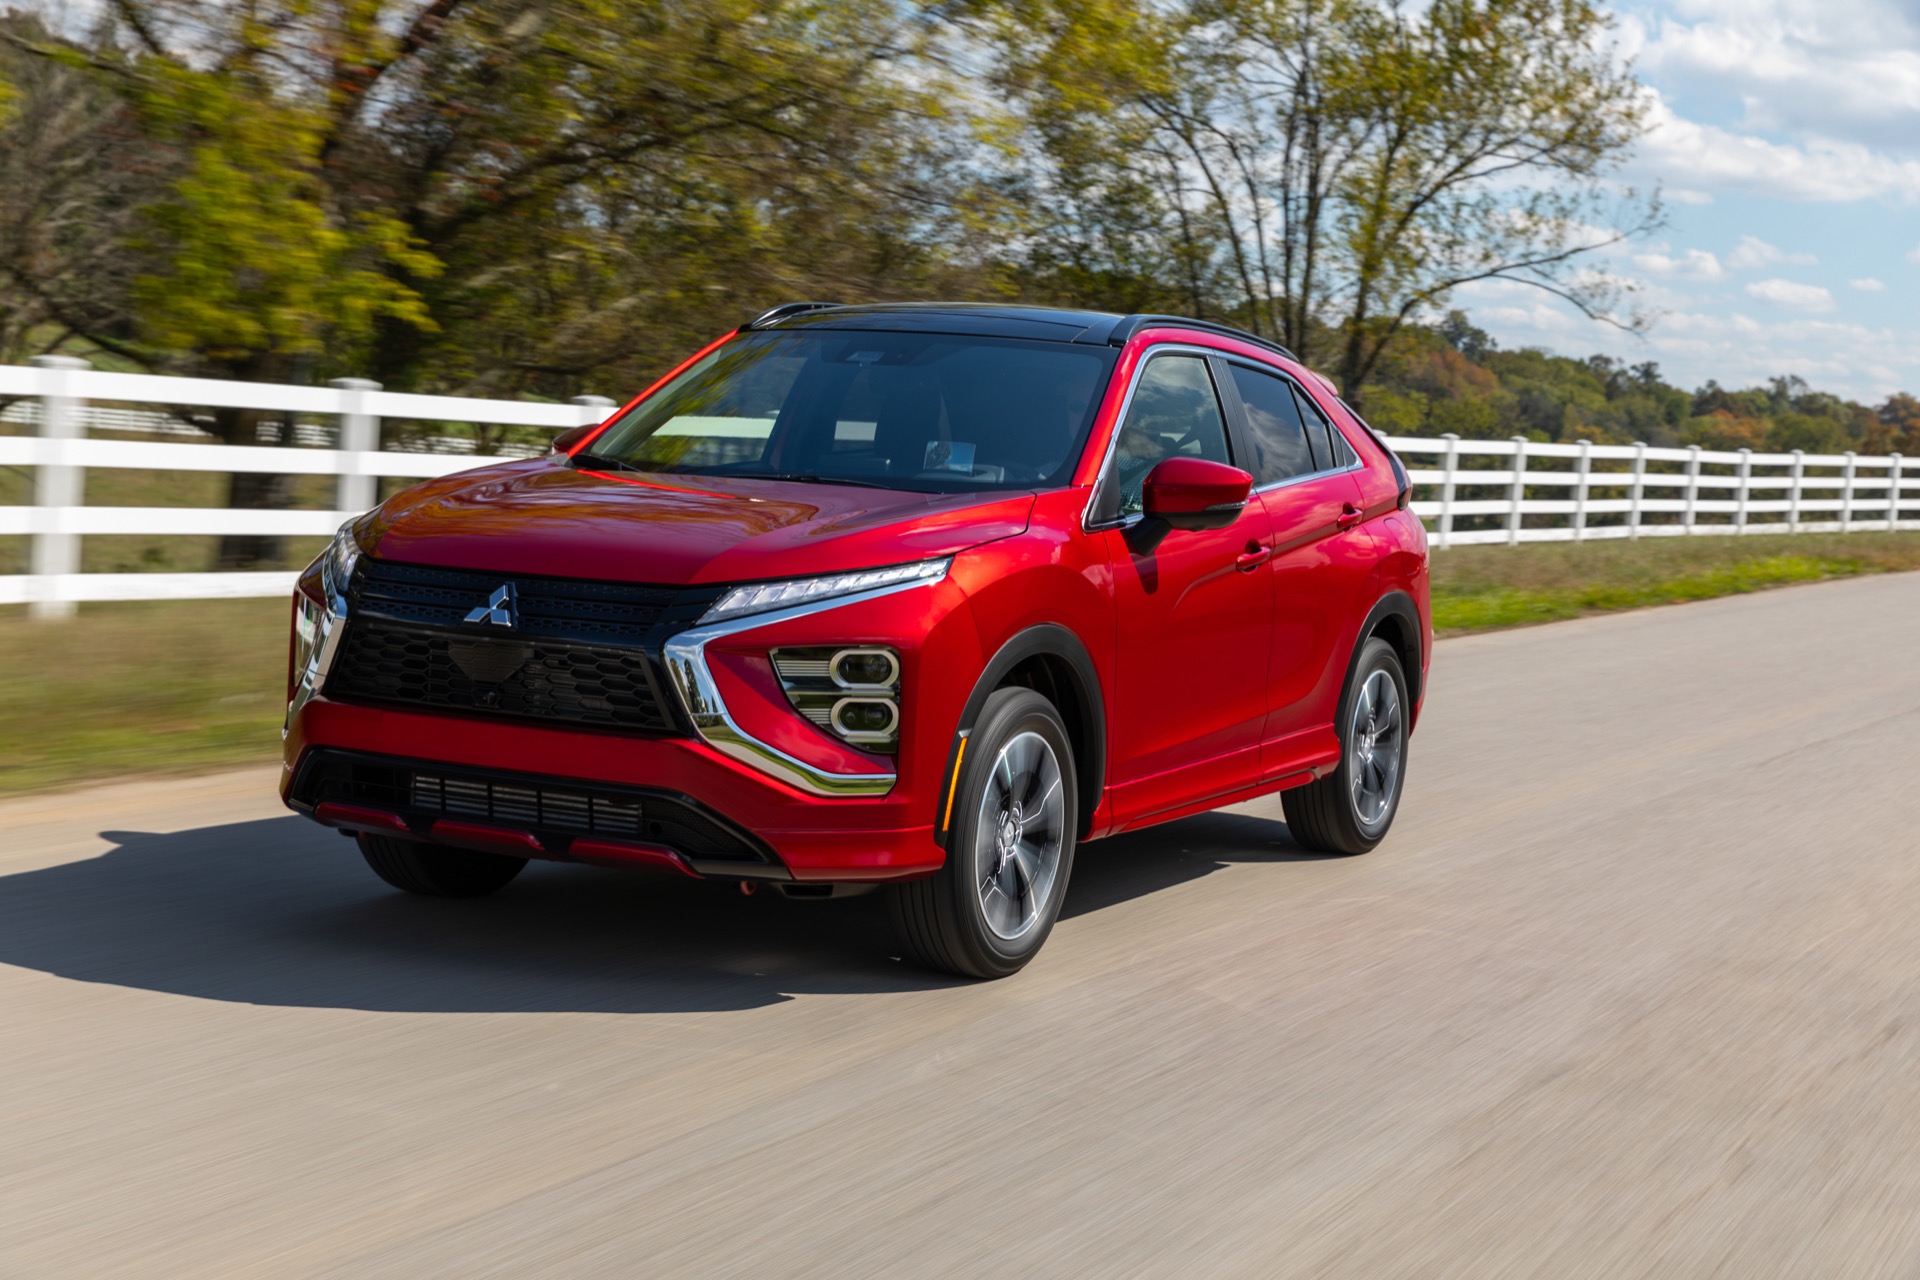 New and Used Mitsubishi Eclipse Cross Prices, Photos, Reviews, Specs